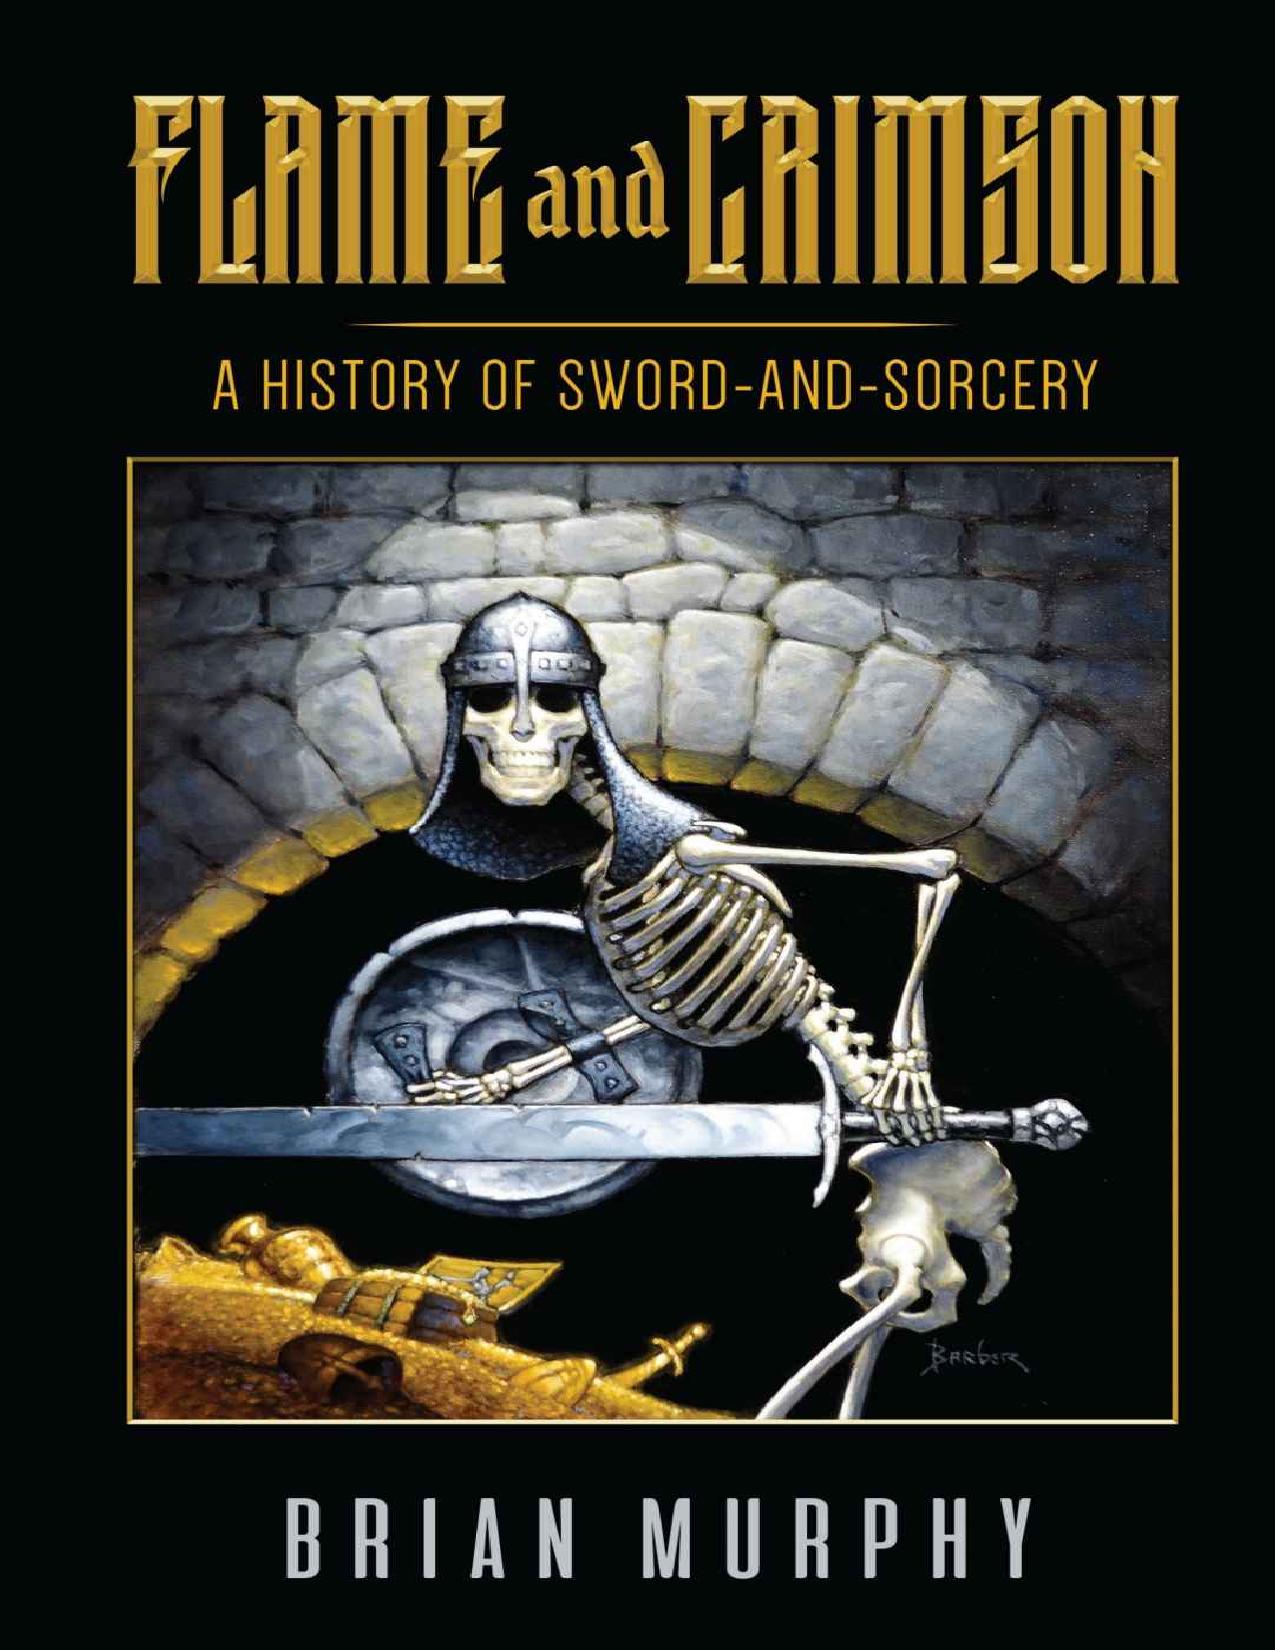 Flame and Crimson, A History of Sword-and-Sorcery